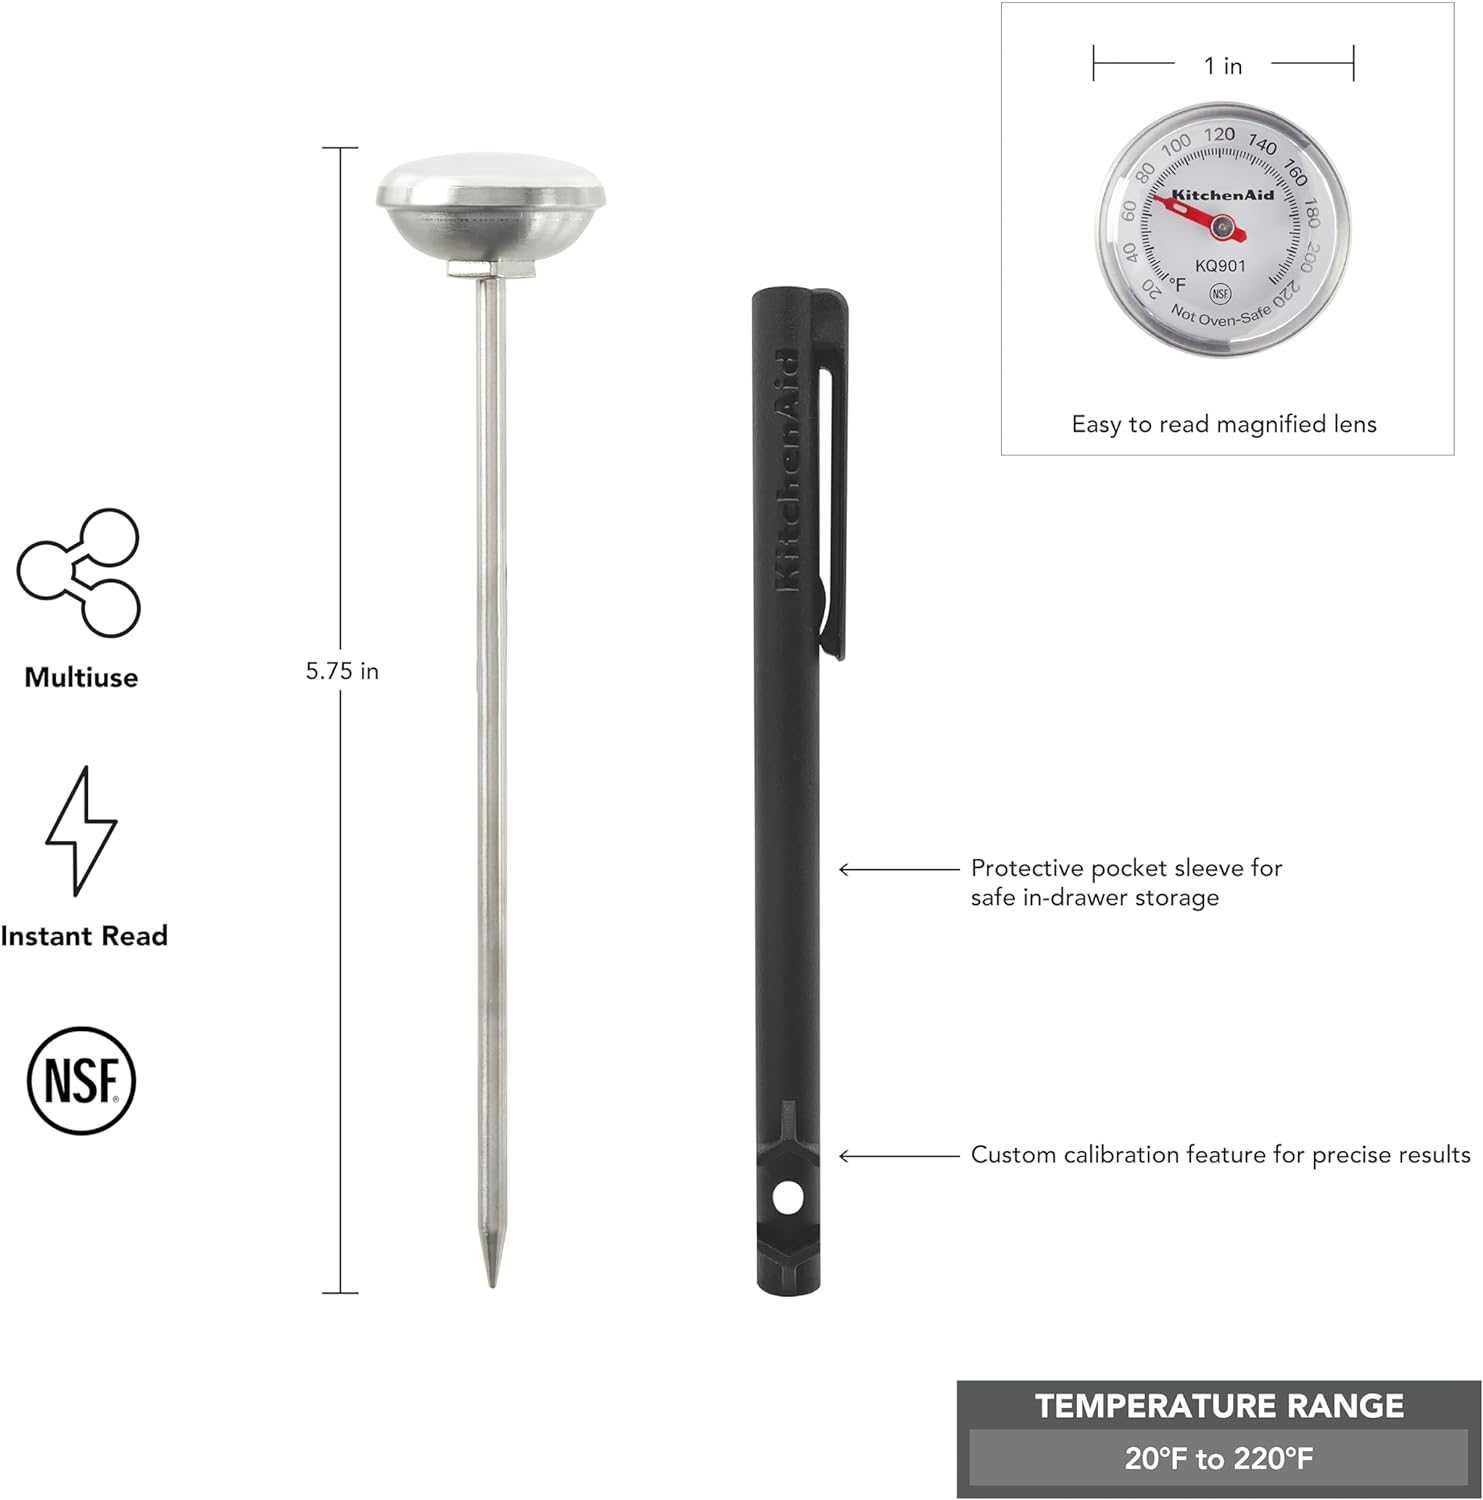 KitchenAid Analog Instant Read Food and Meat Thermometer with 1.75-inch Dial, Recalibration Feature, Black Storage Sleeve